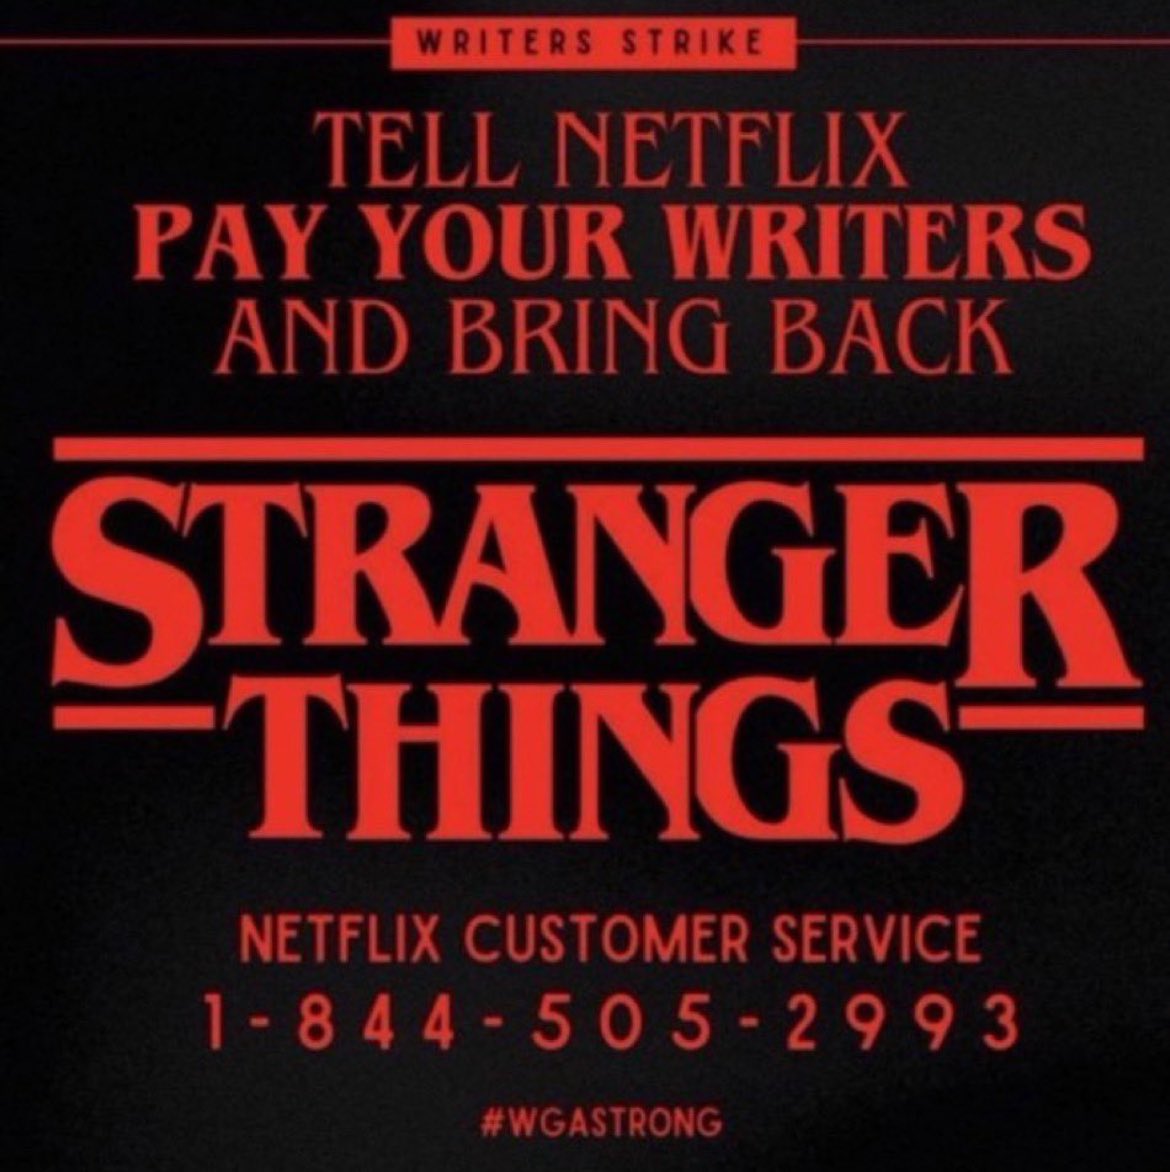 it’s officially been EIGHT weeks since the #WGA strikes began. ENOUGH IS ENOUGH.
#Netflix PAY YOUR WRITERS. 
without them, you have NOTHING.
#StrangerFansForWGA #WgaStrong #EnoughIsEnough #PayYourWriters